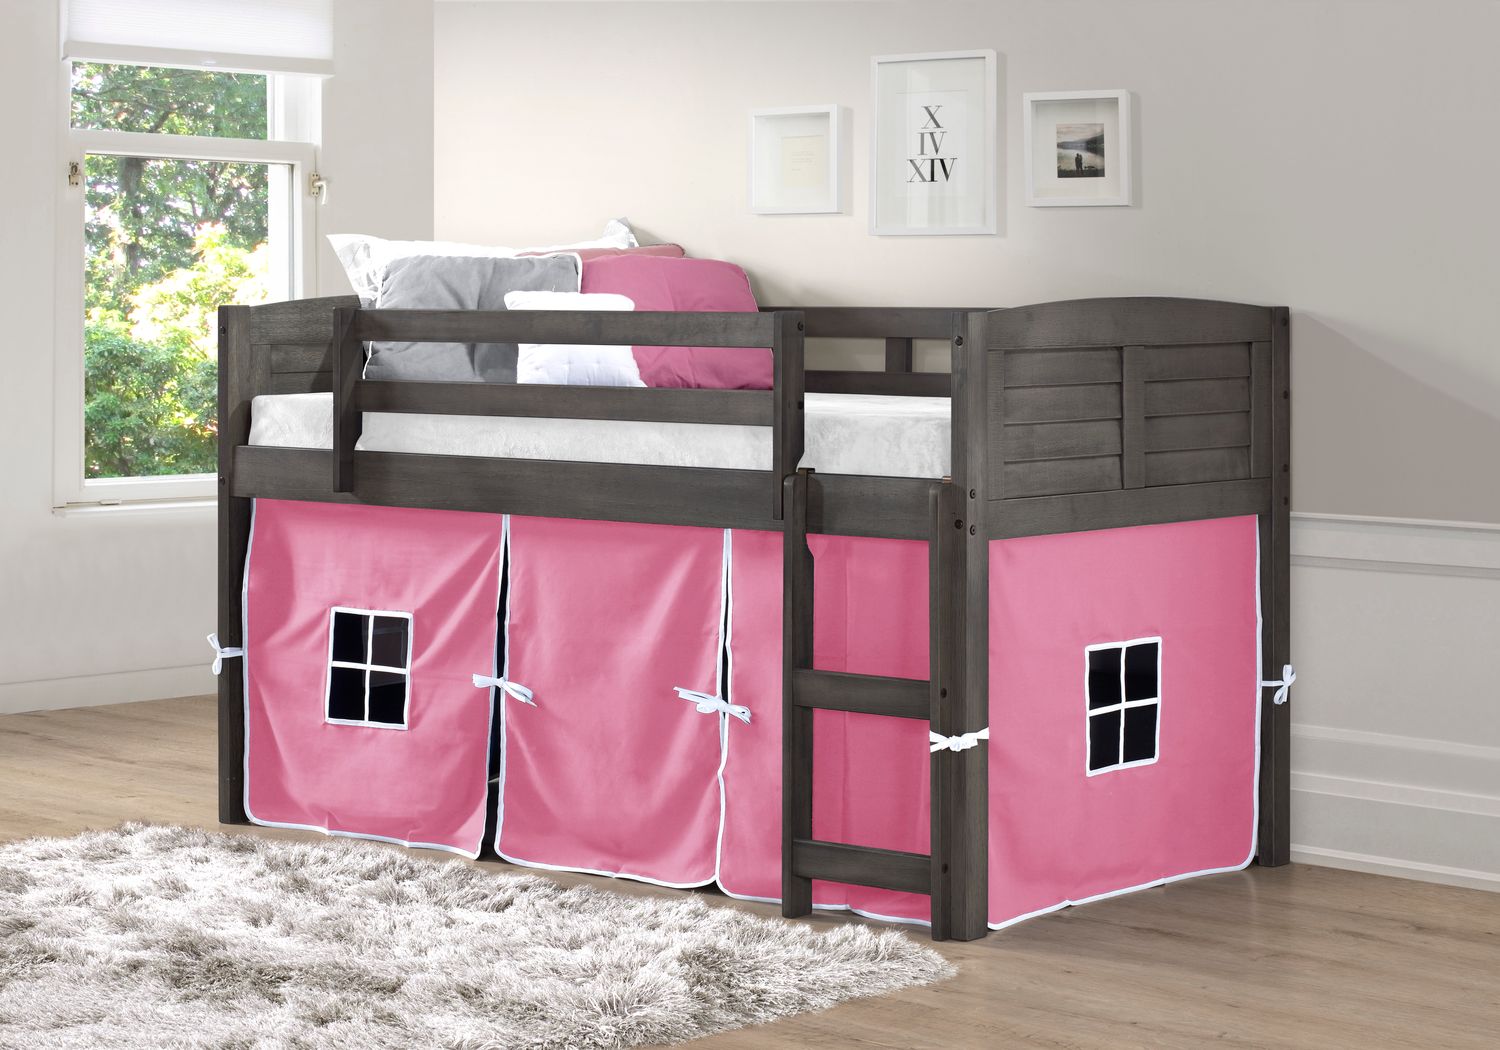 Bunk Beds For Kids, Rooms To Go Loft Bunk Beds